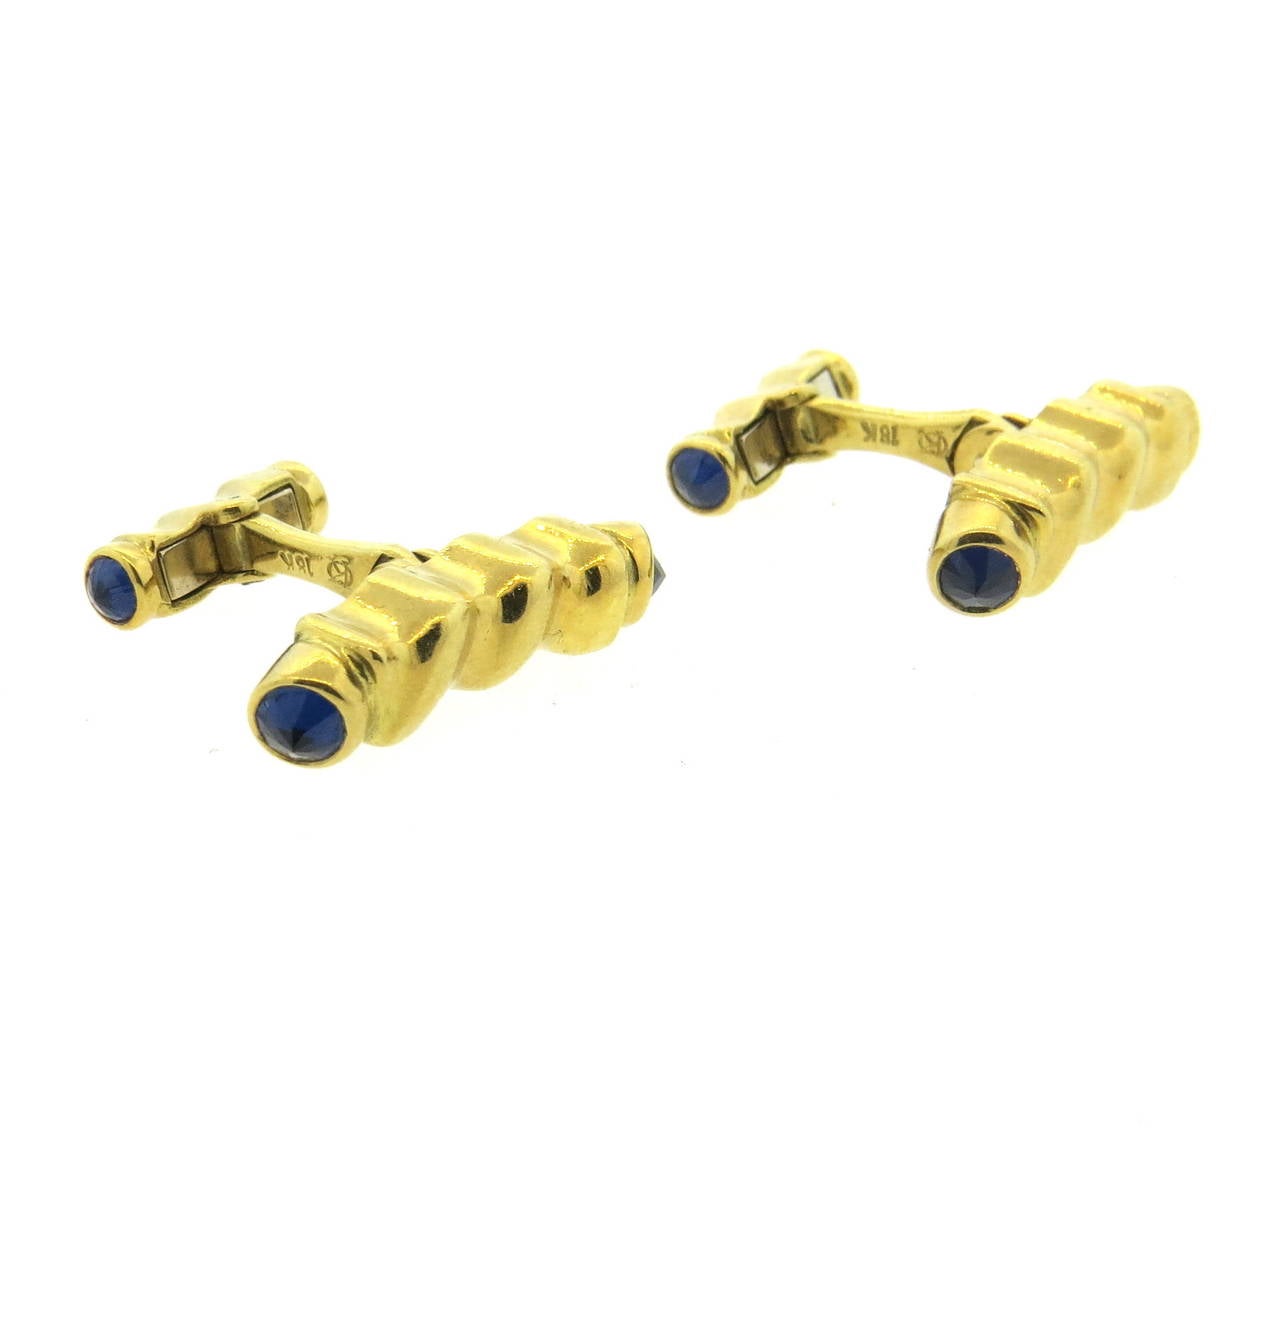 Large 18k yellow gold twist cufflinks, set with blue sapphires. Top measures 27mm x 6mm. Marked 18k. Weight - 25.2 grams